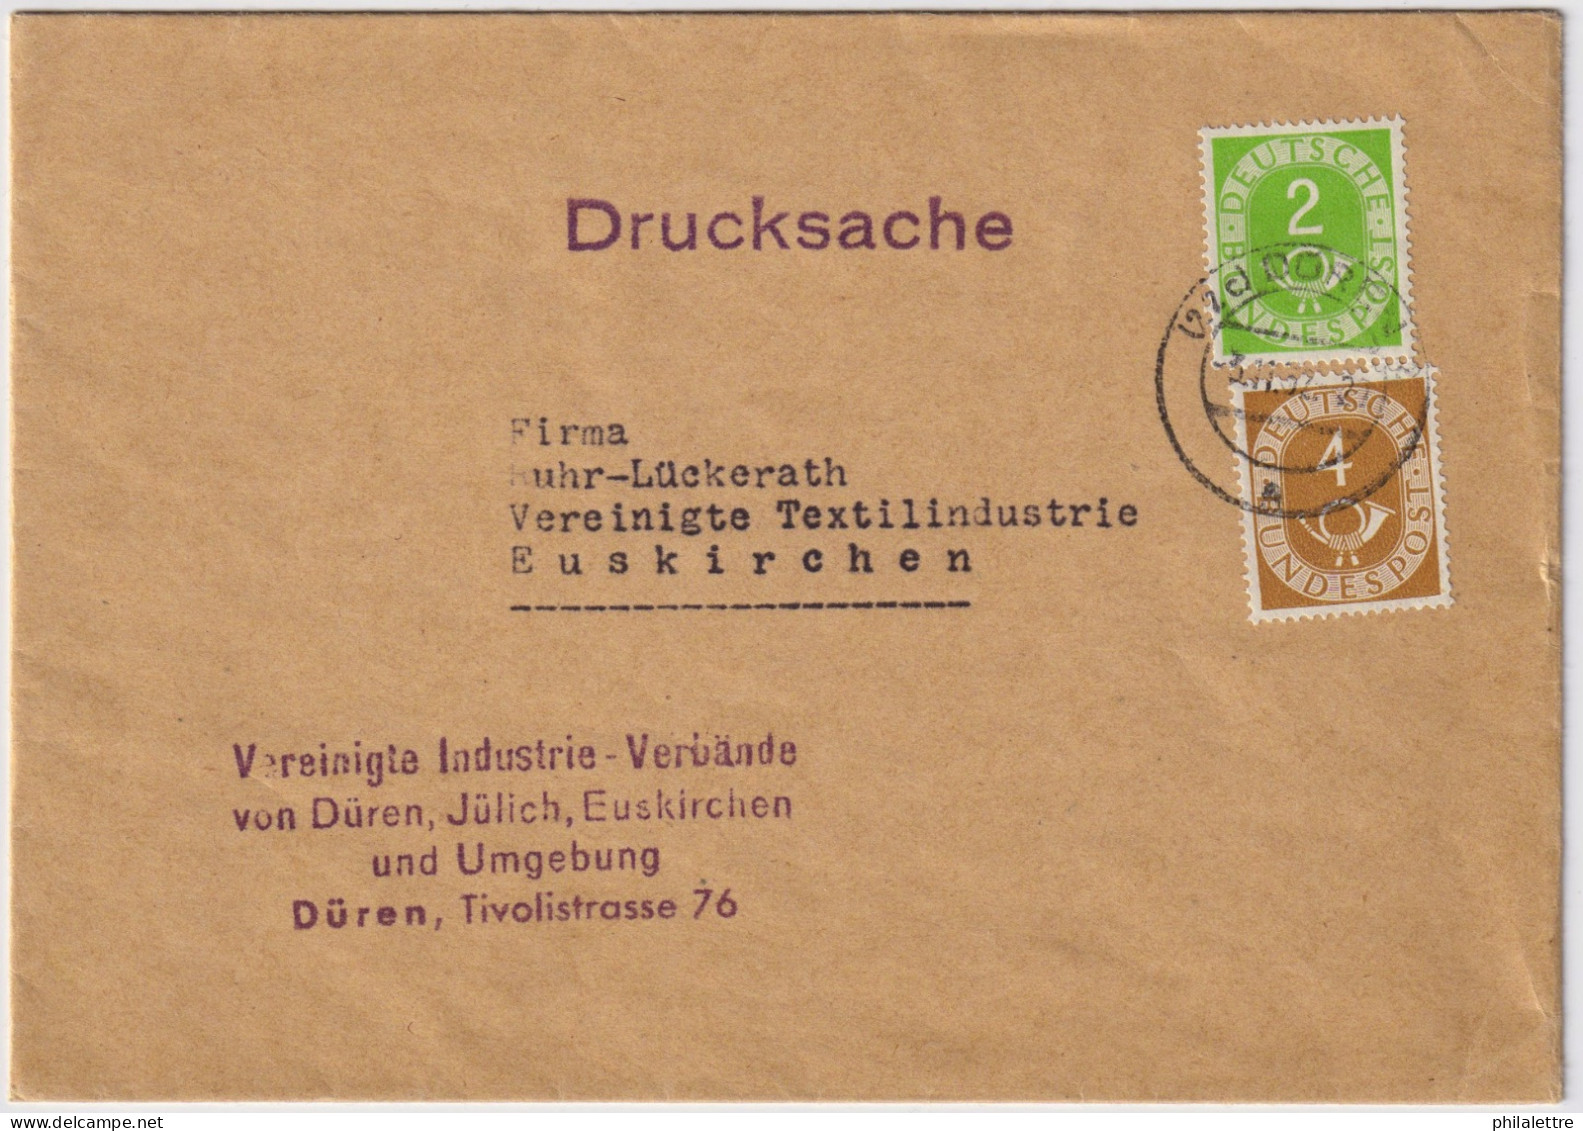 ALLEMAGNE / GERMANY - 1953 - Mi.123 & Mi.124 2pf. & 4pf. On Printed Matters (Drucksache) Cover From Düren To Euskirchen - Covers & Documents